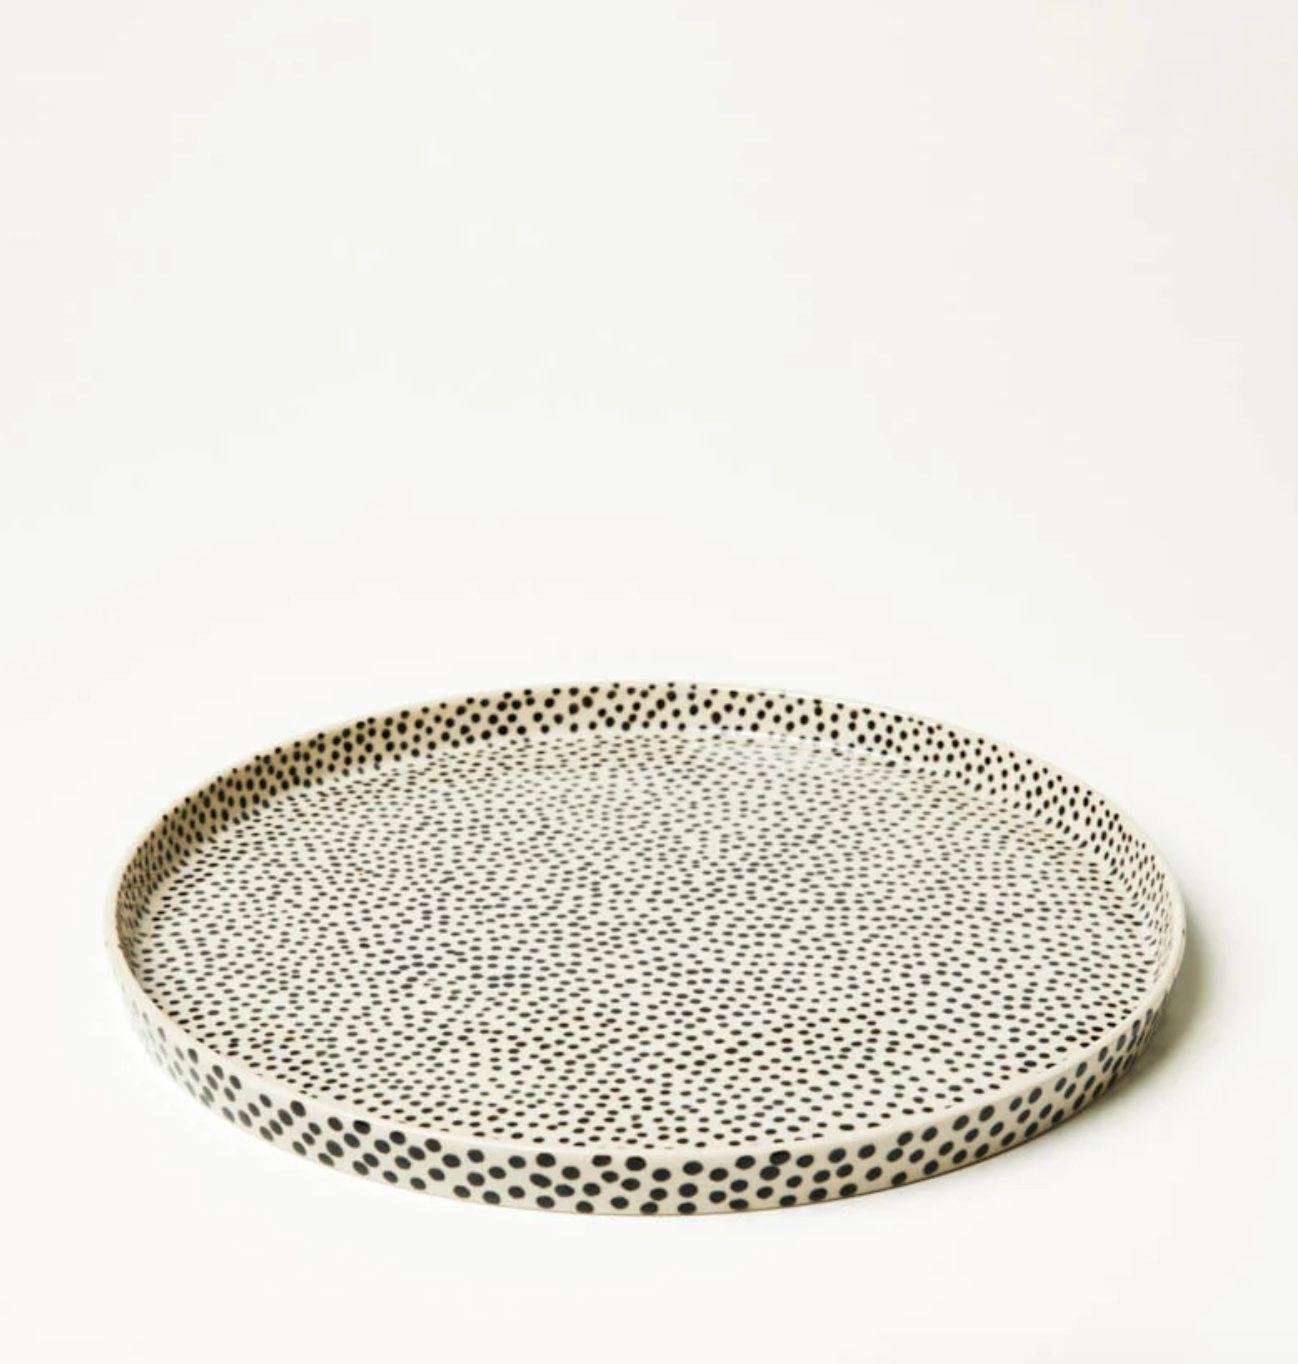 Black Spotted Tray